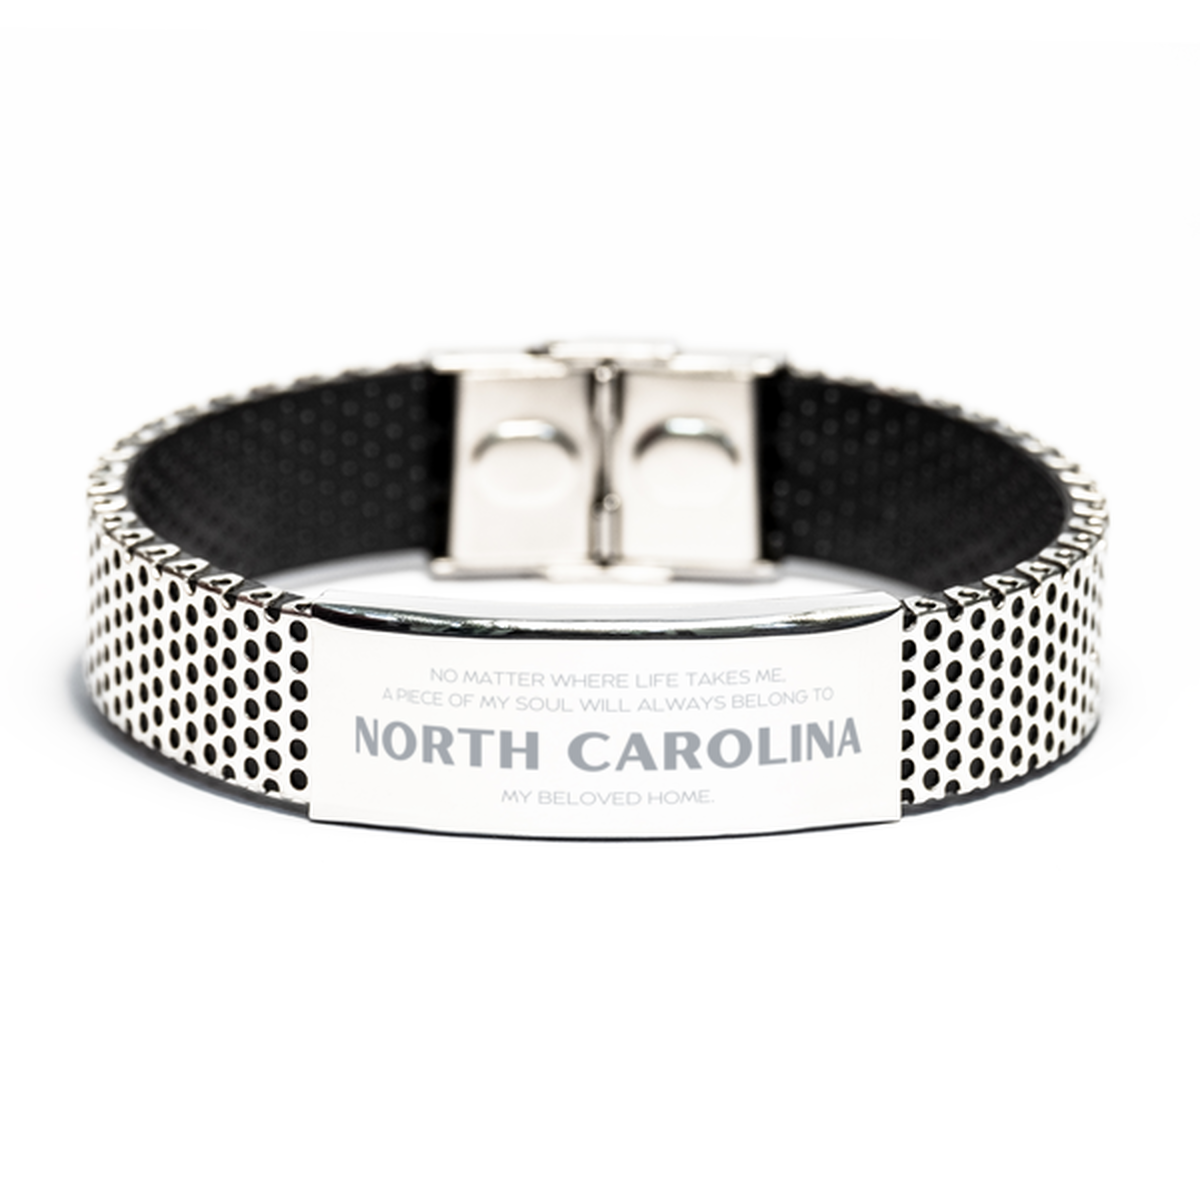 Love North Carolina State Gifts, My soul will always belong to North Carolina, Proud Stainless Steel Bracelet, Birthday Unique Gifts For North Carolina Men, Women, Friends